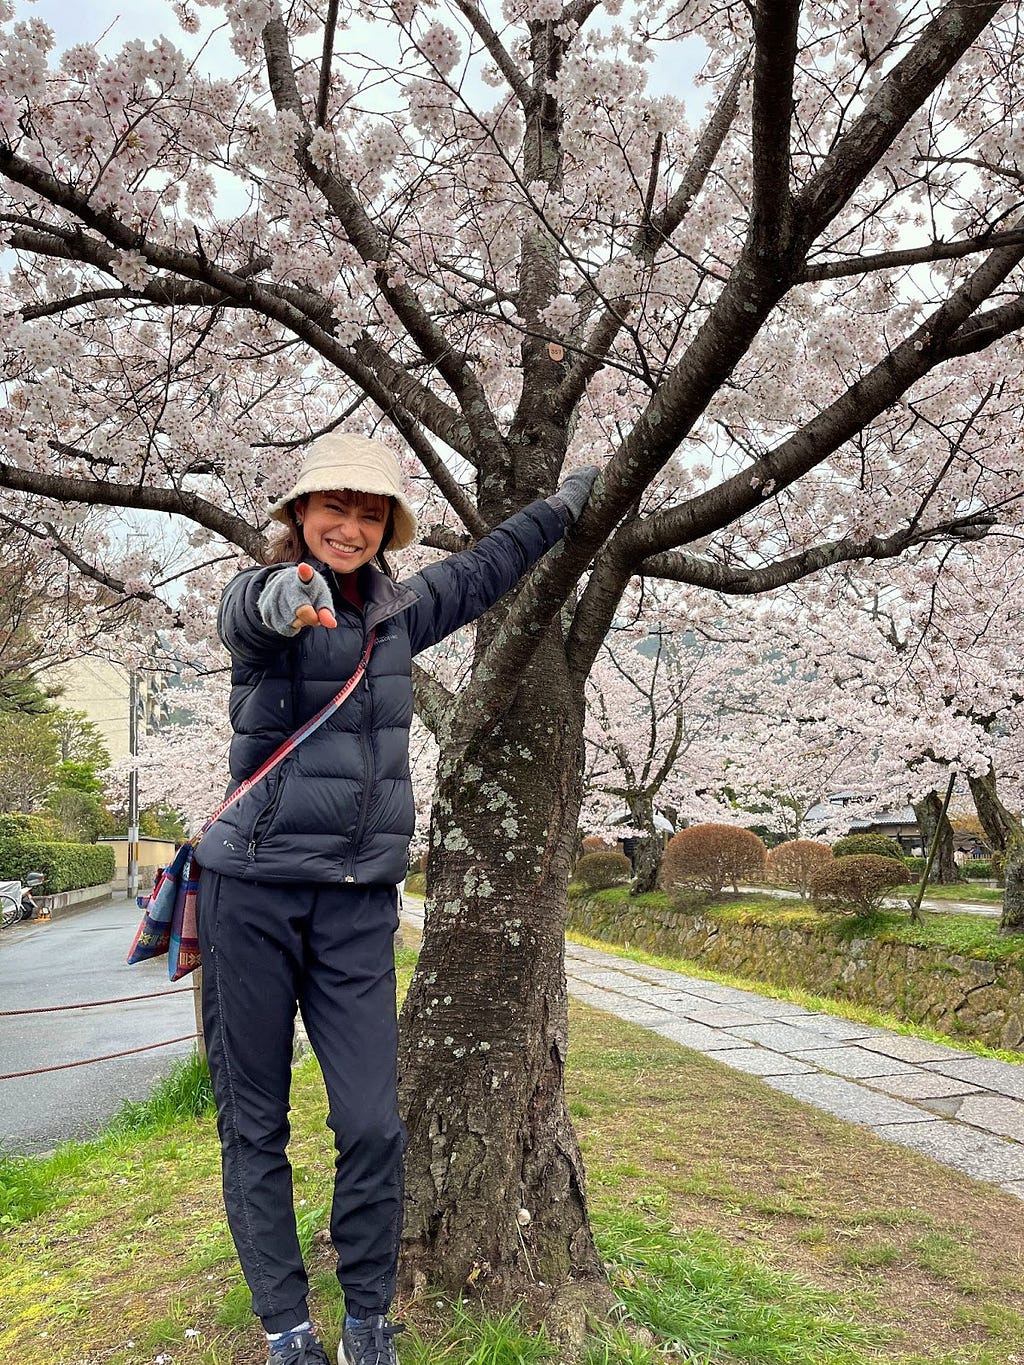 Woman standing next to cherry blossom tree